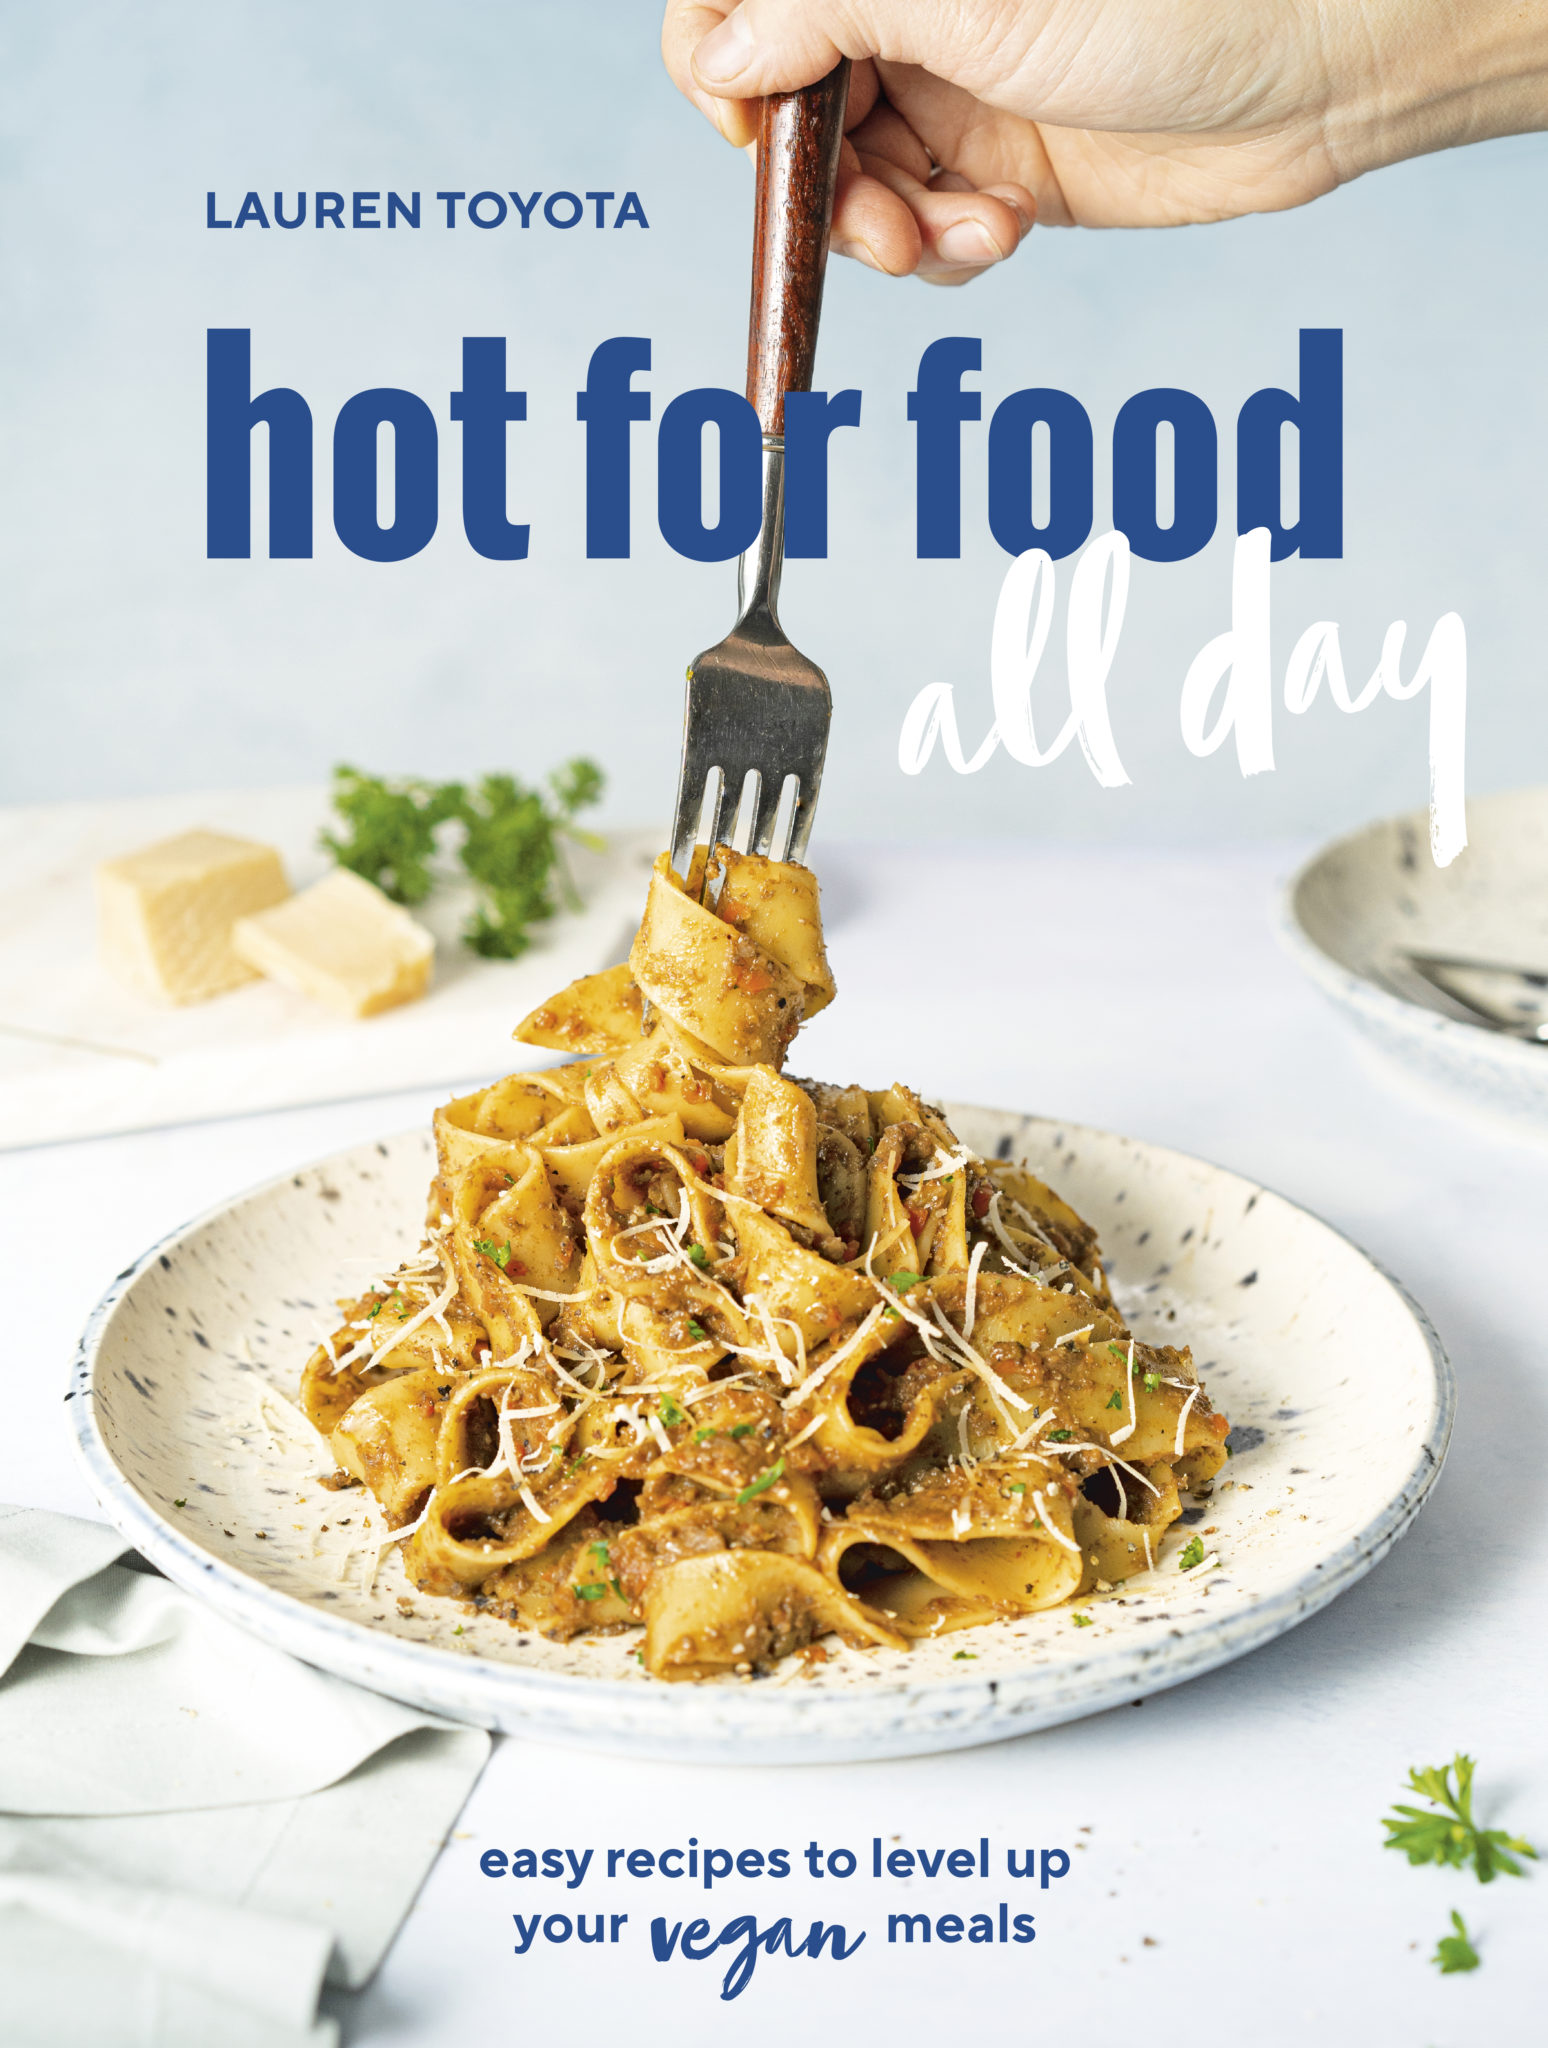 Tahu Go - hot for food all day cover scaled image 1